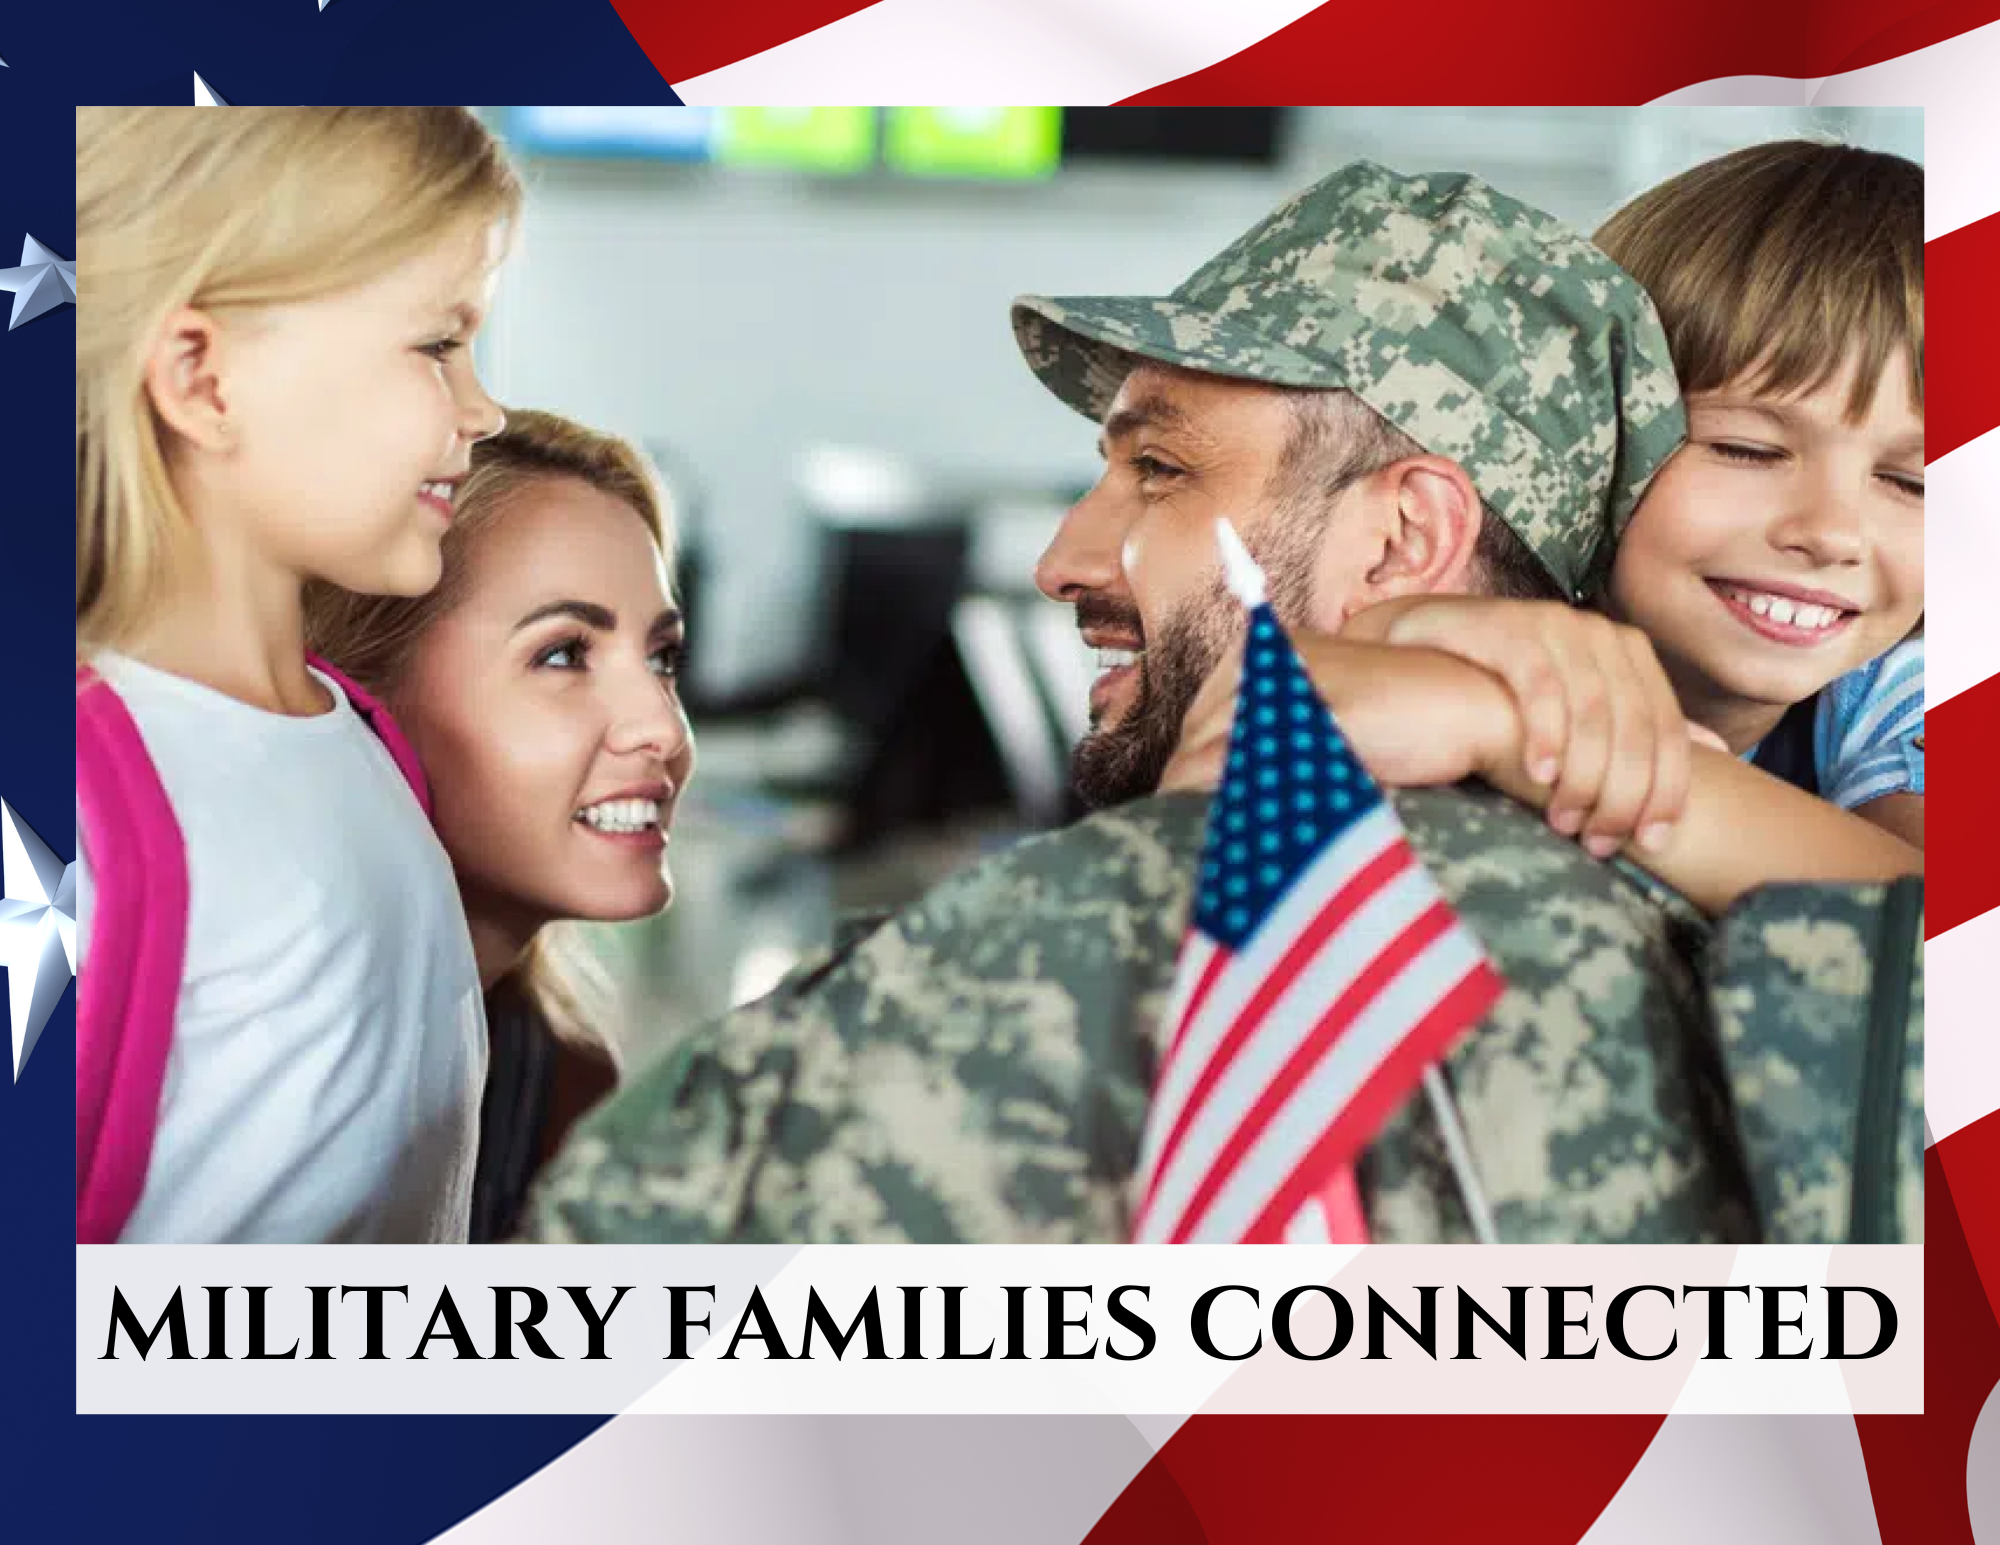 Militatry families picture